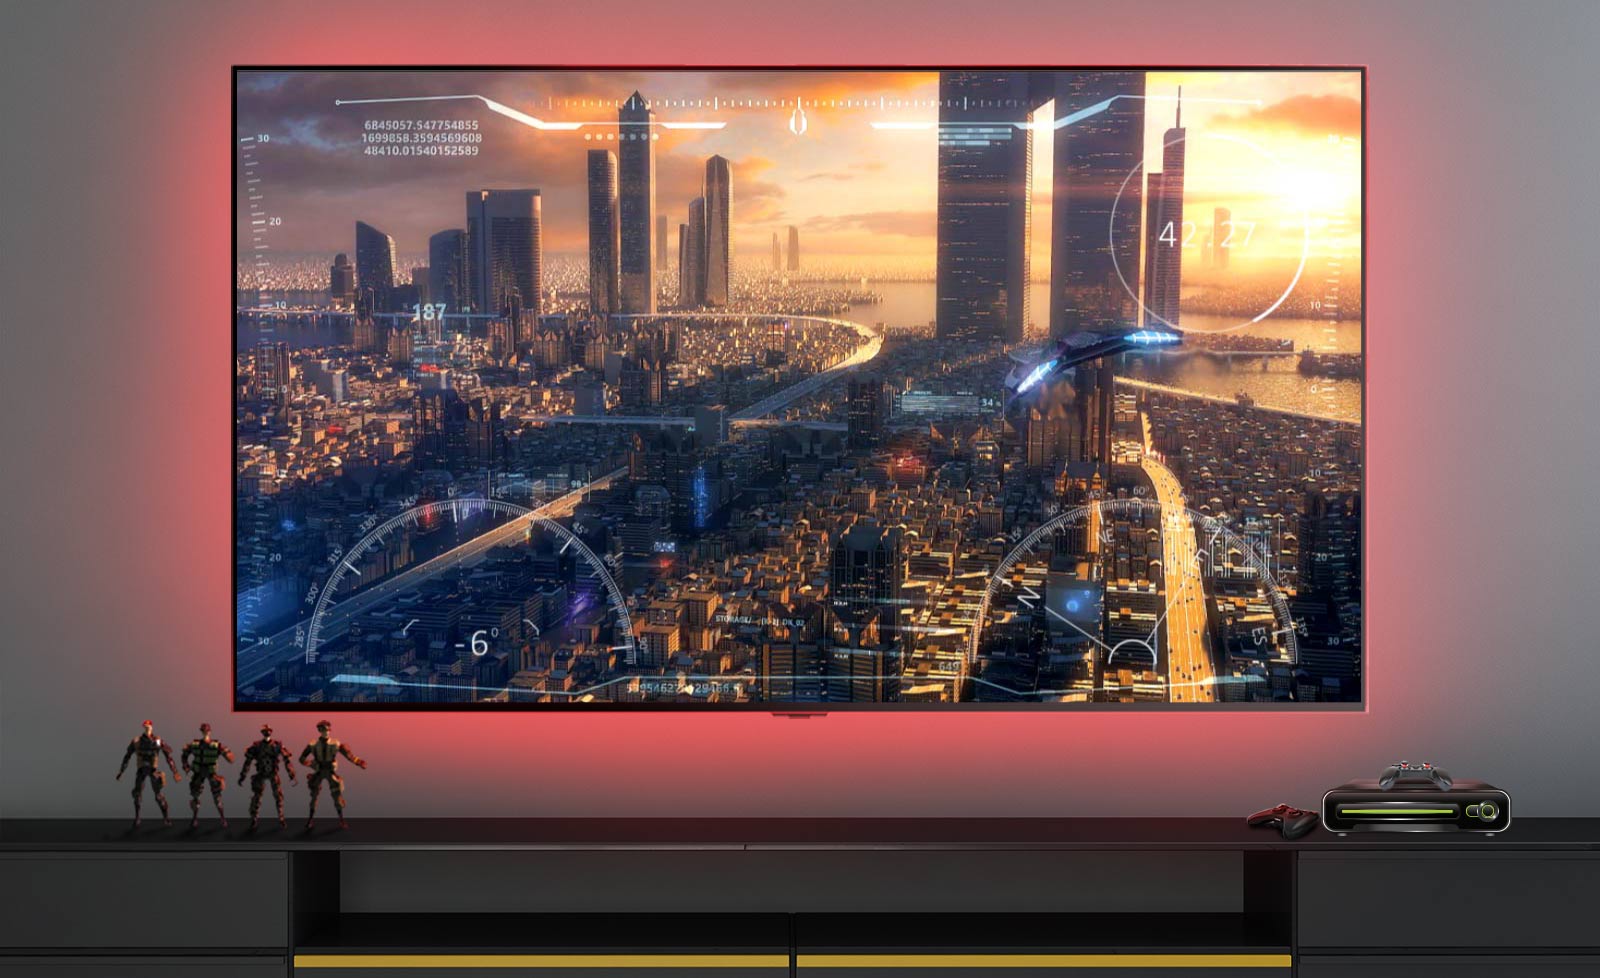 A scene of a video game showing a spaceship flying over a city shown on a TV screen (play the video).